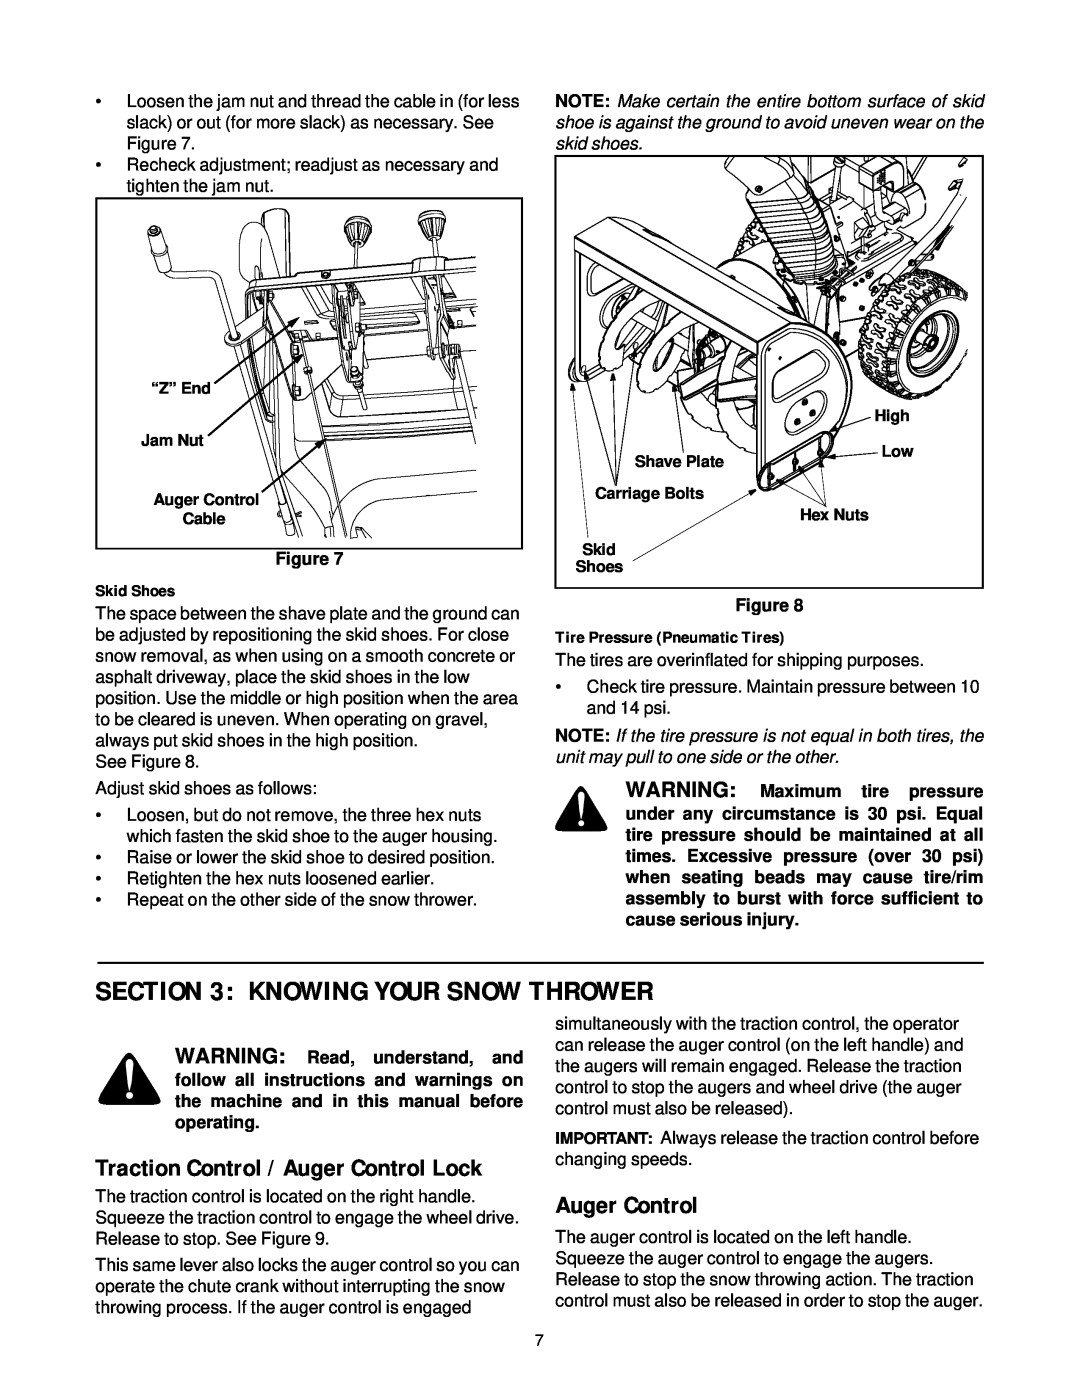 Yard-Man 31AE993I401 manual Knowing Your Snow Thrower, Traction Control / Auger Control Lock, Skid Shoes, Figure 